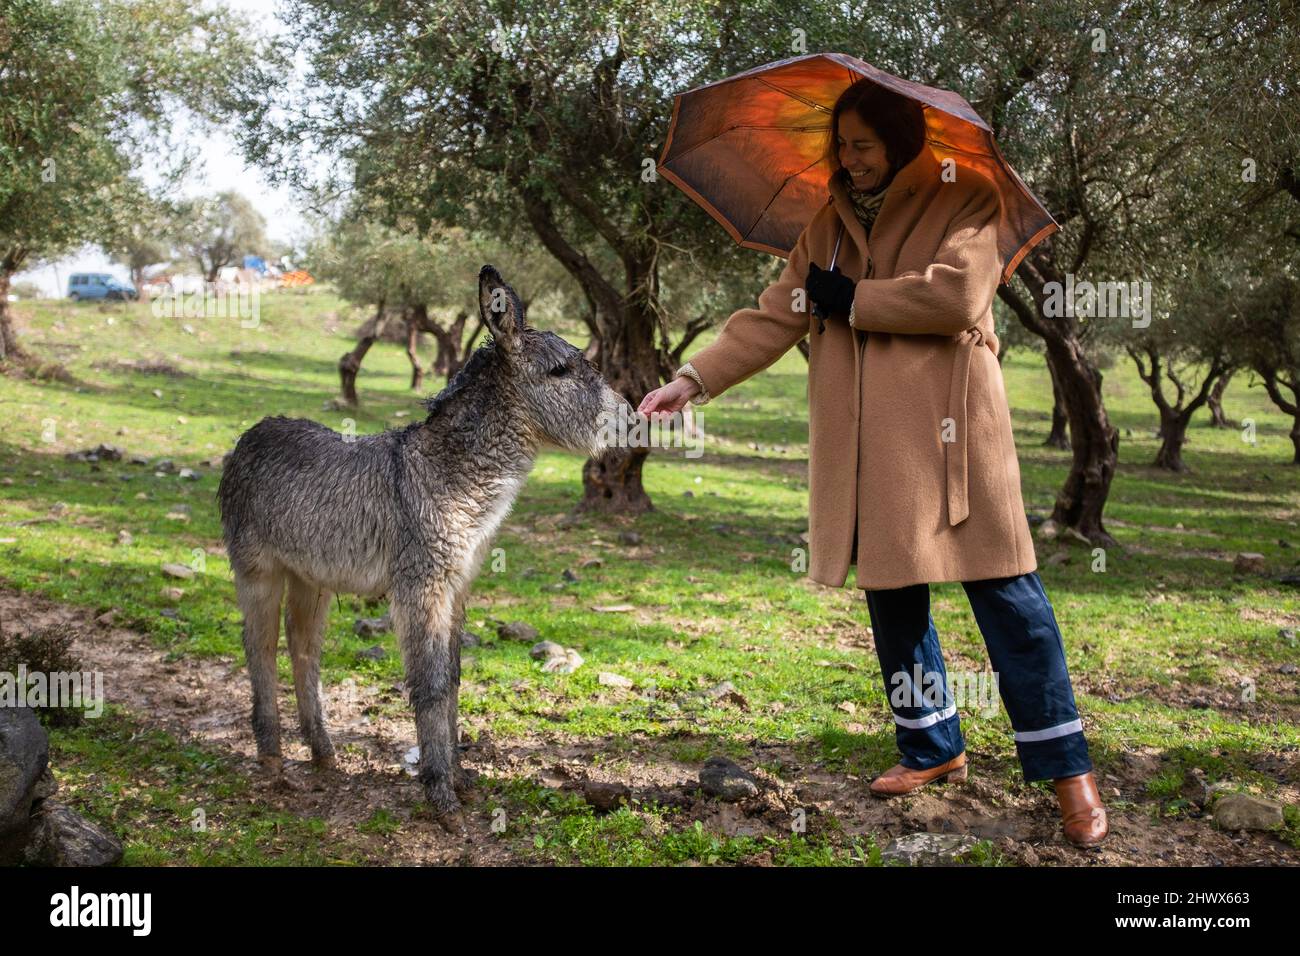 Woman petting a donkey in countryside Stock Photo